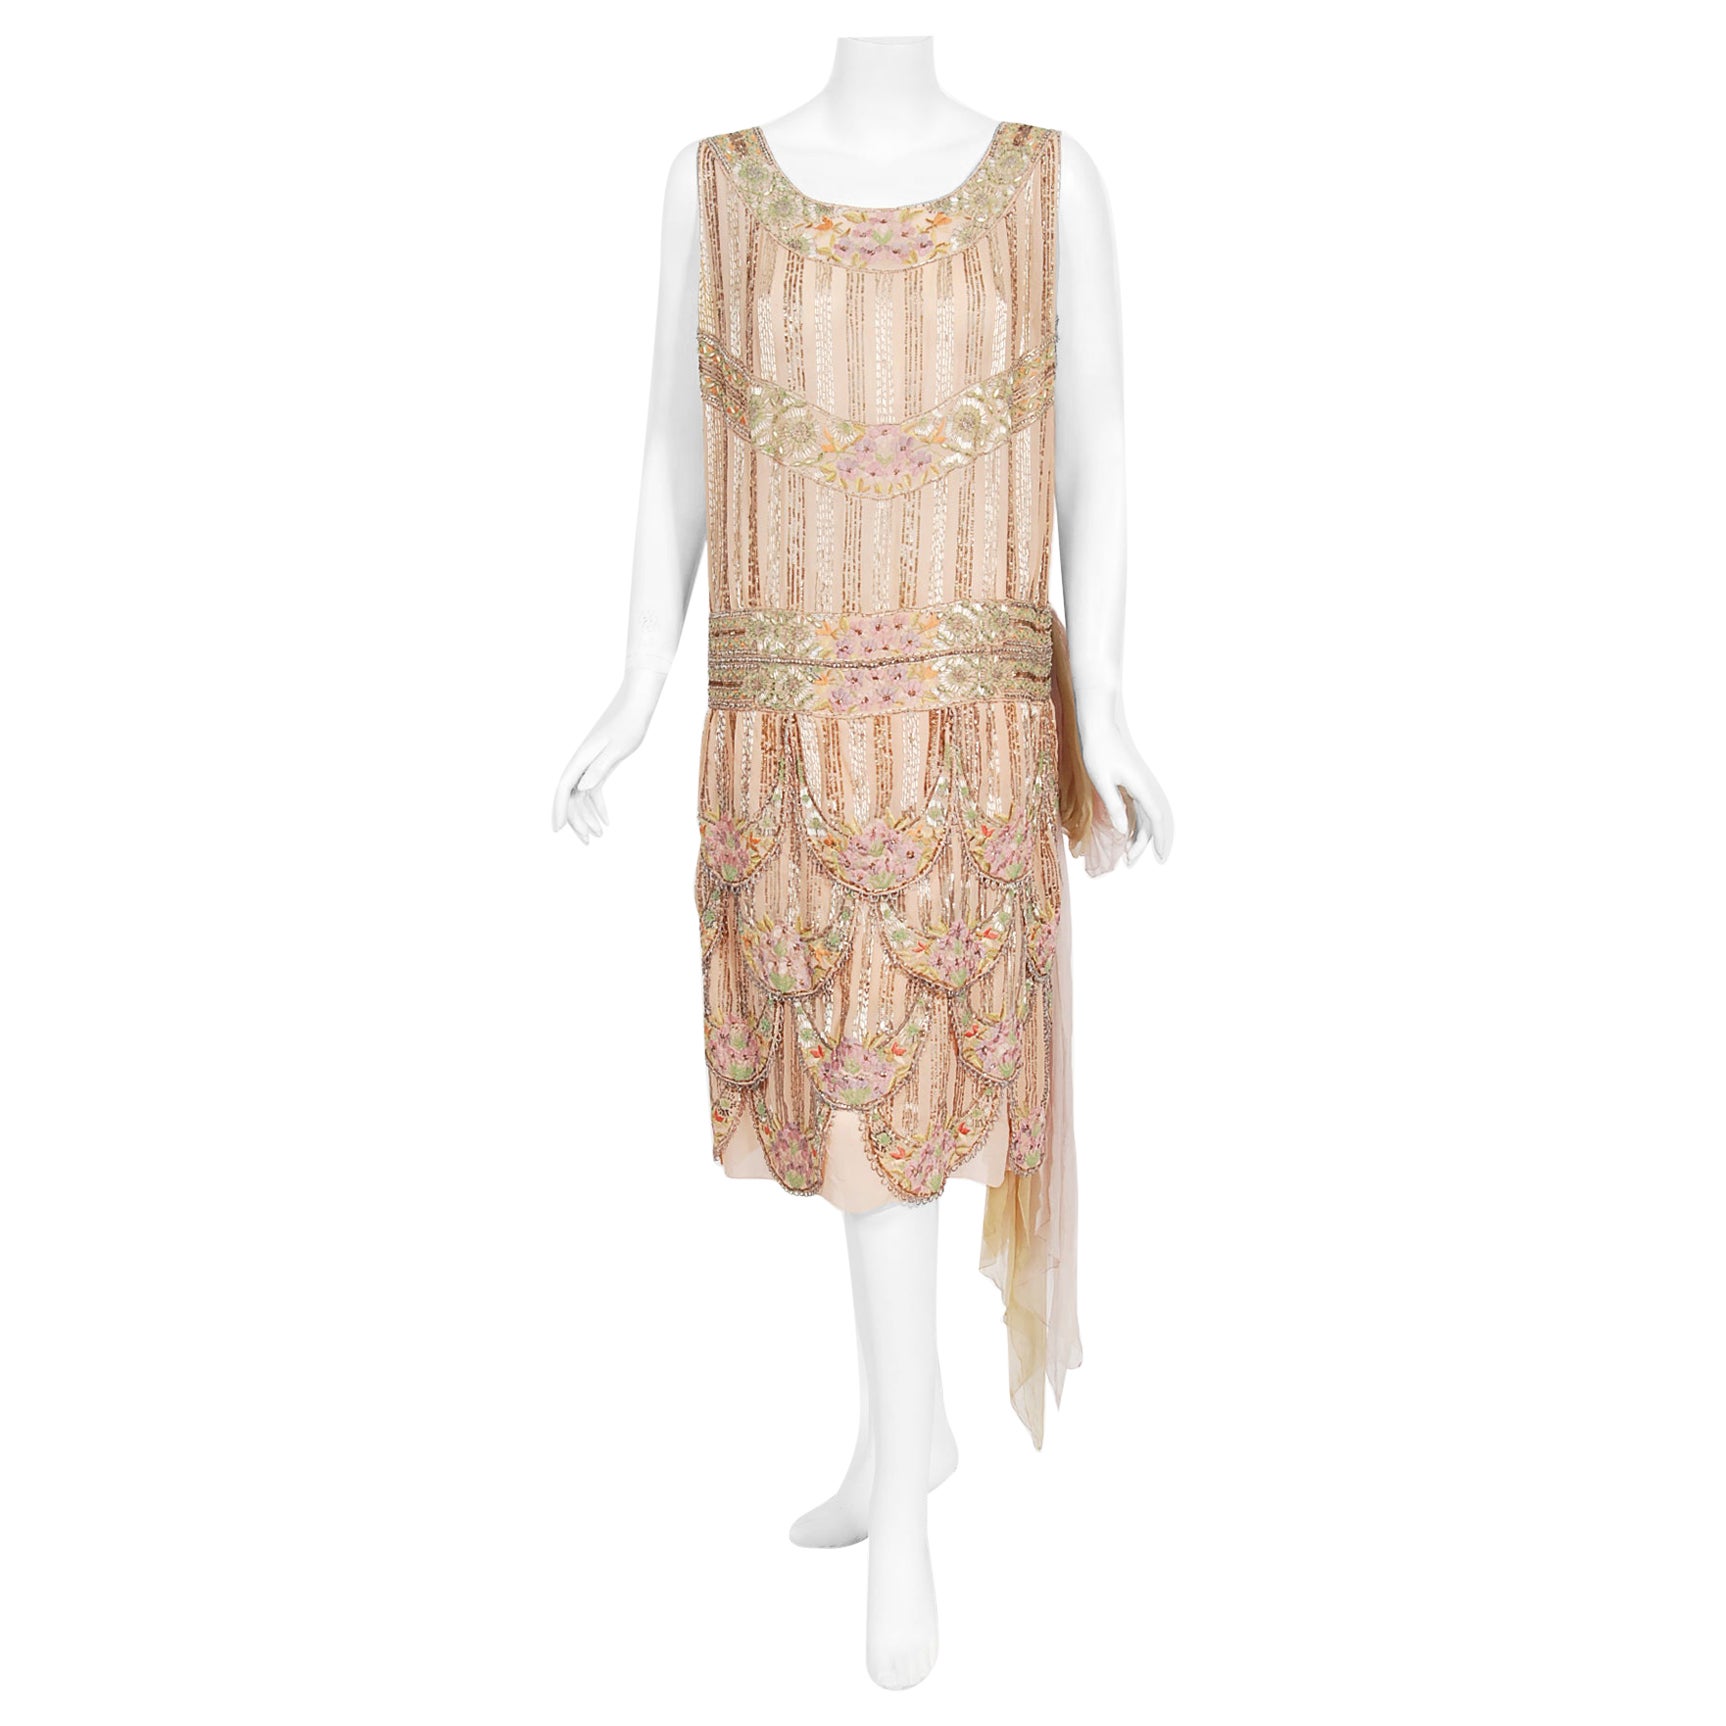 Chanel 1920s Dress - 8 For Sale on 1stDibs  coco chanel dresses 1920, chanel  dress 1920s, coco chanel 1920s flapper dress